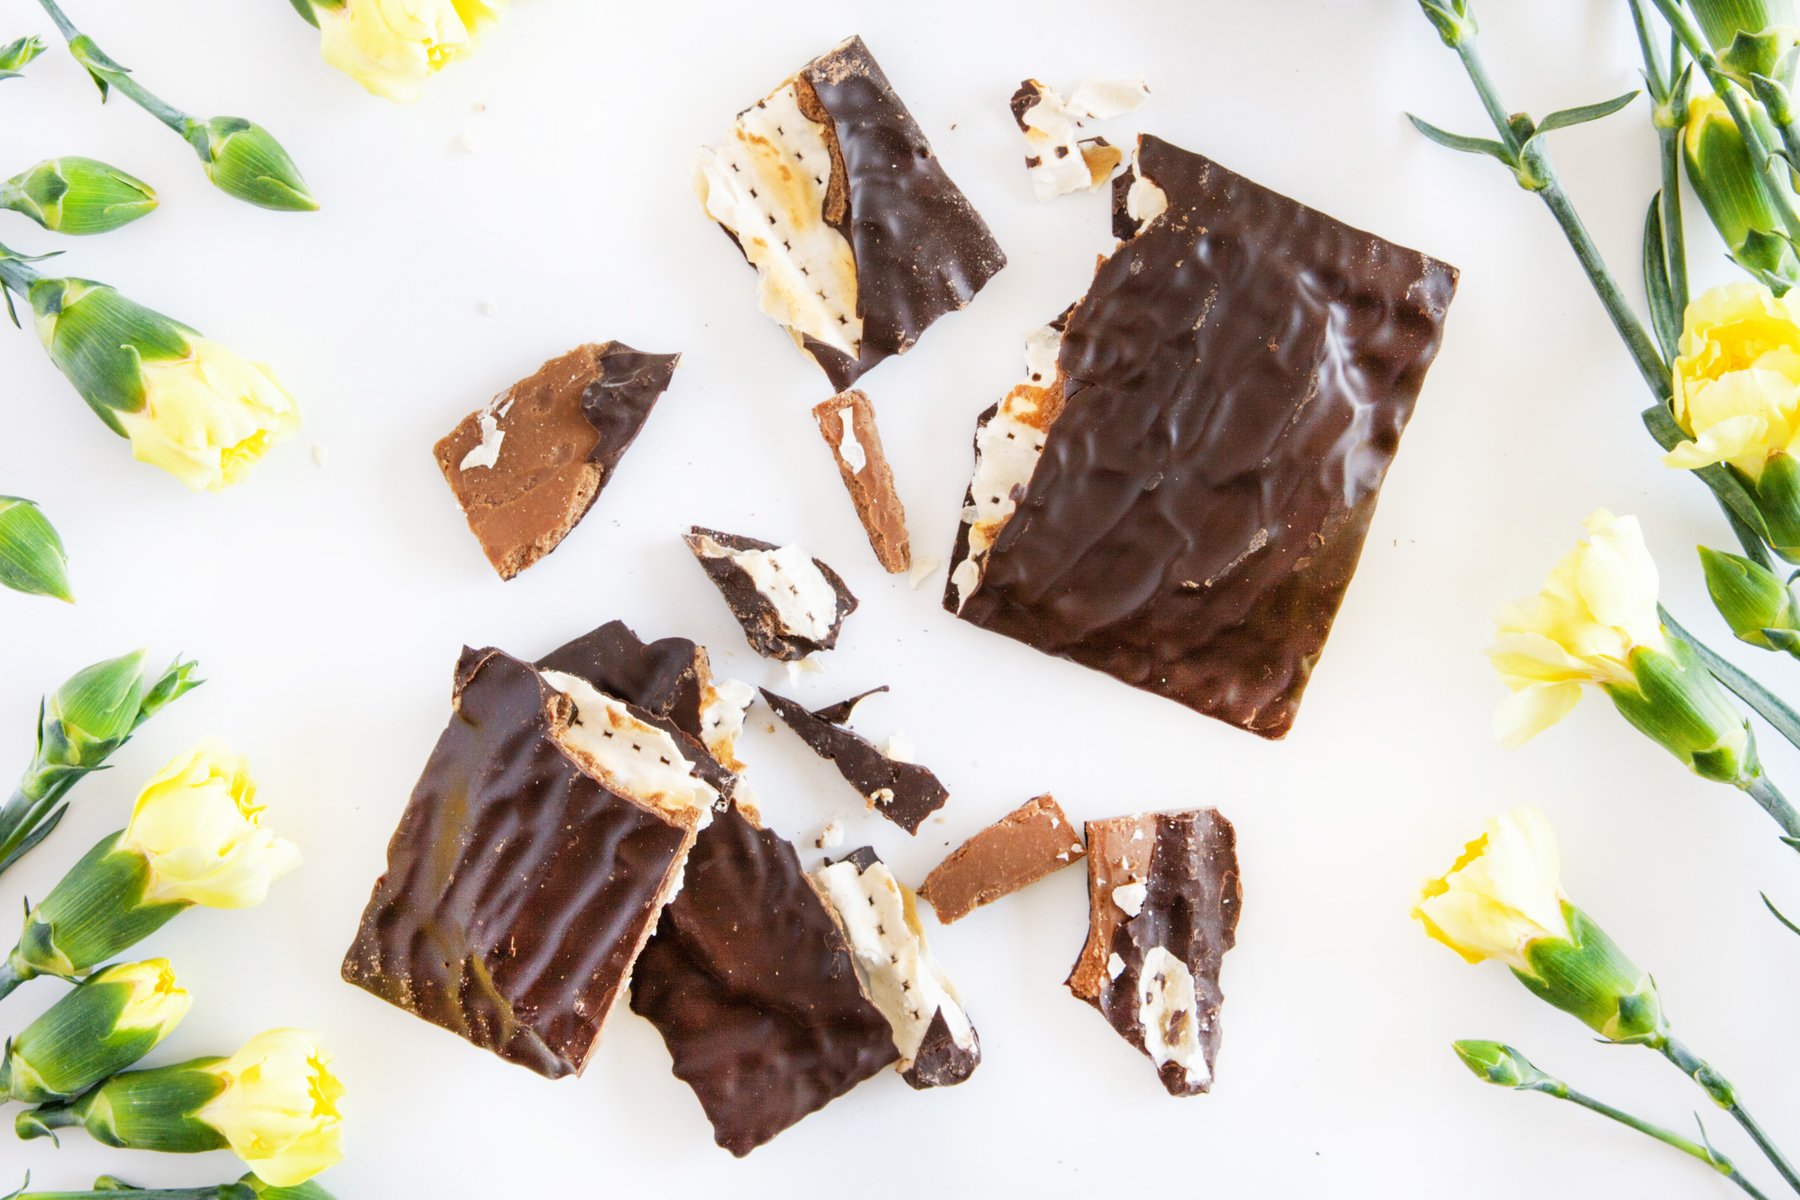 Gourmet chocolate matzo for Passover: Jacques Torres makes a hazelnut praline chocolate matzoh and wow